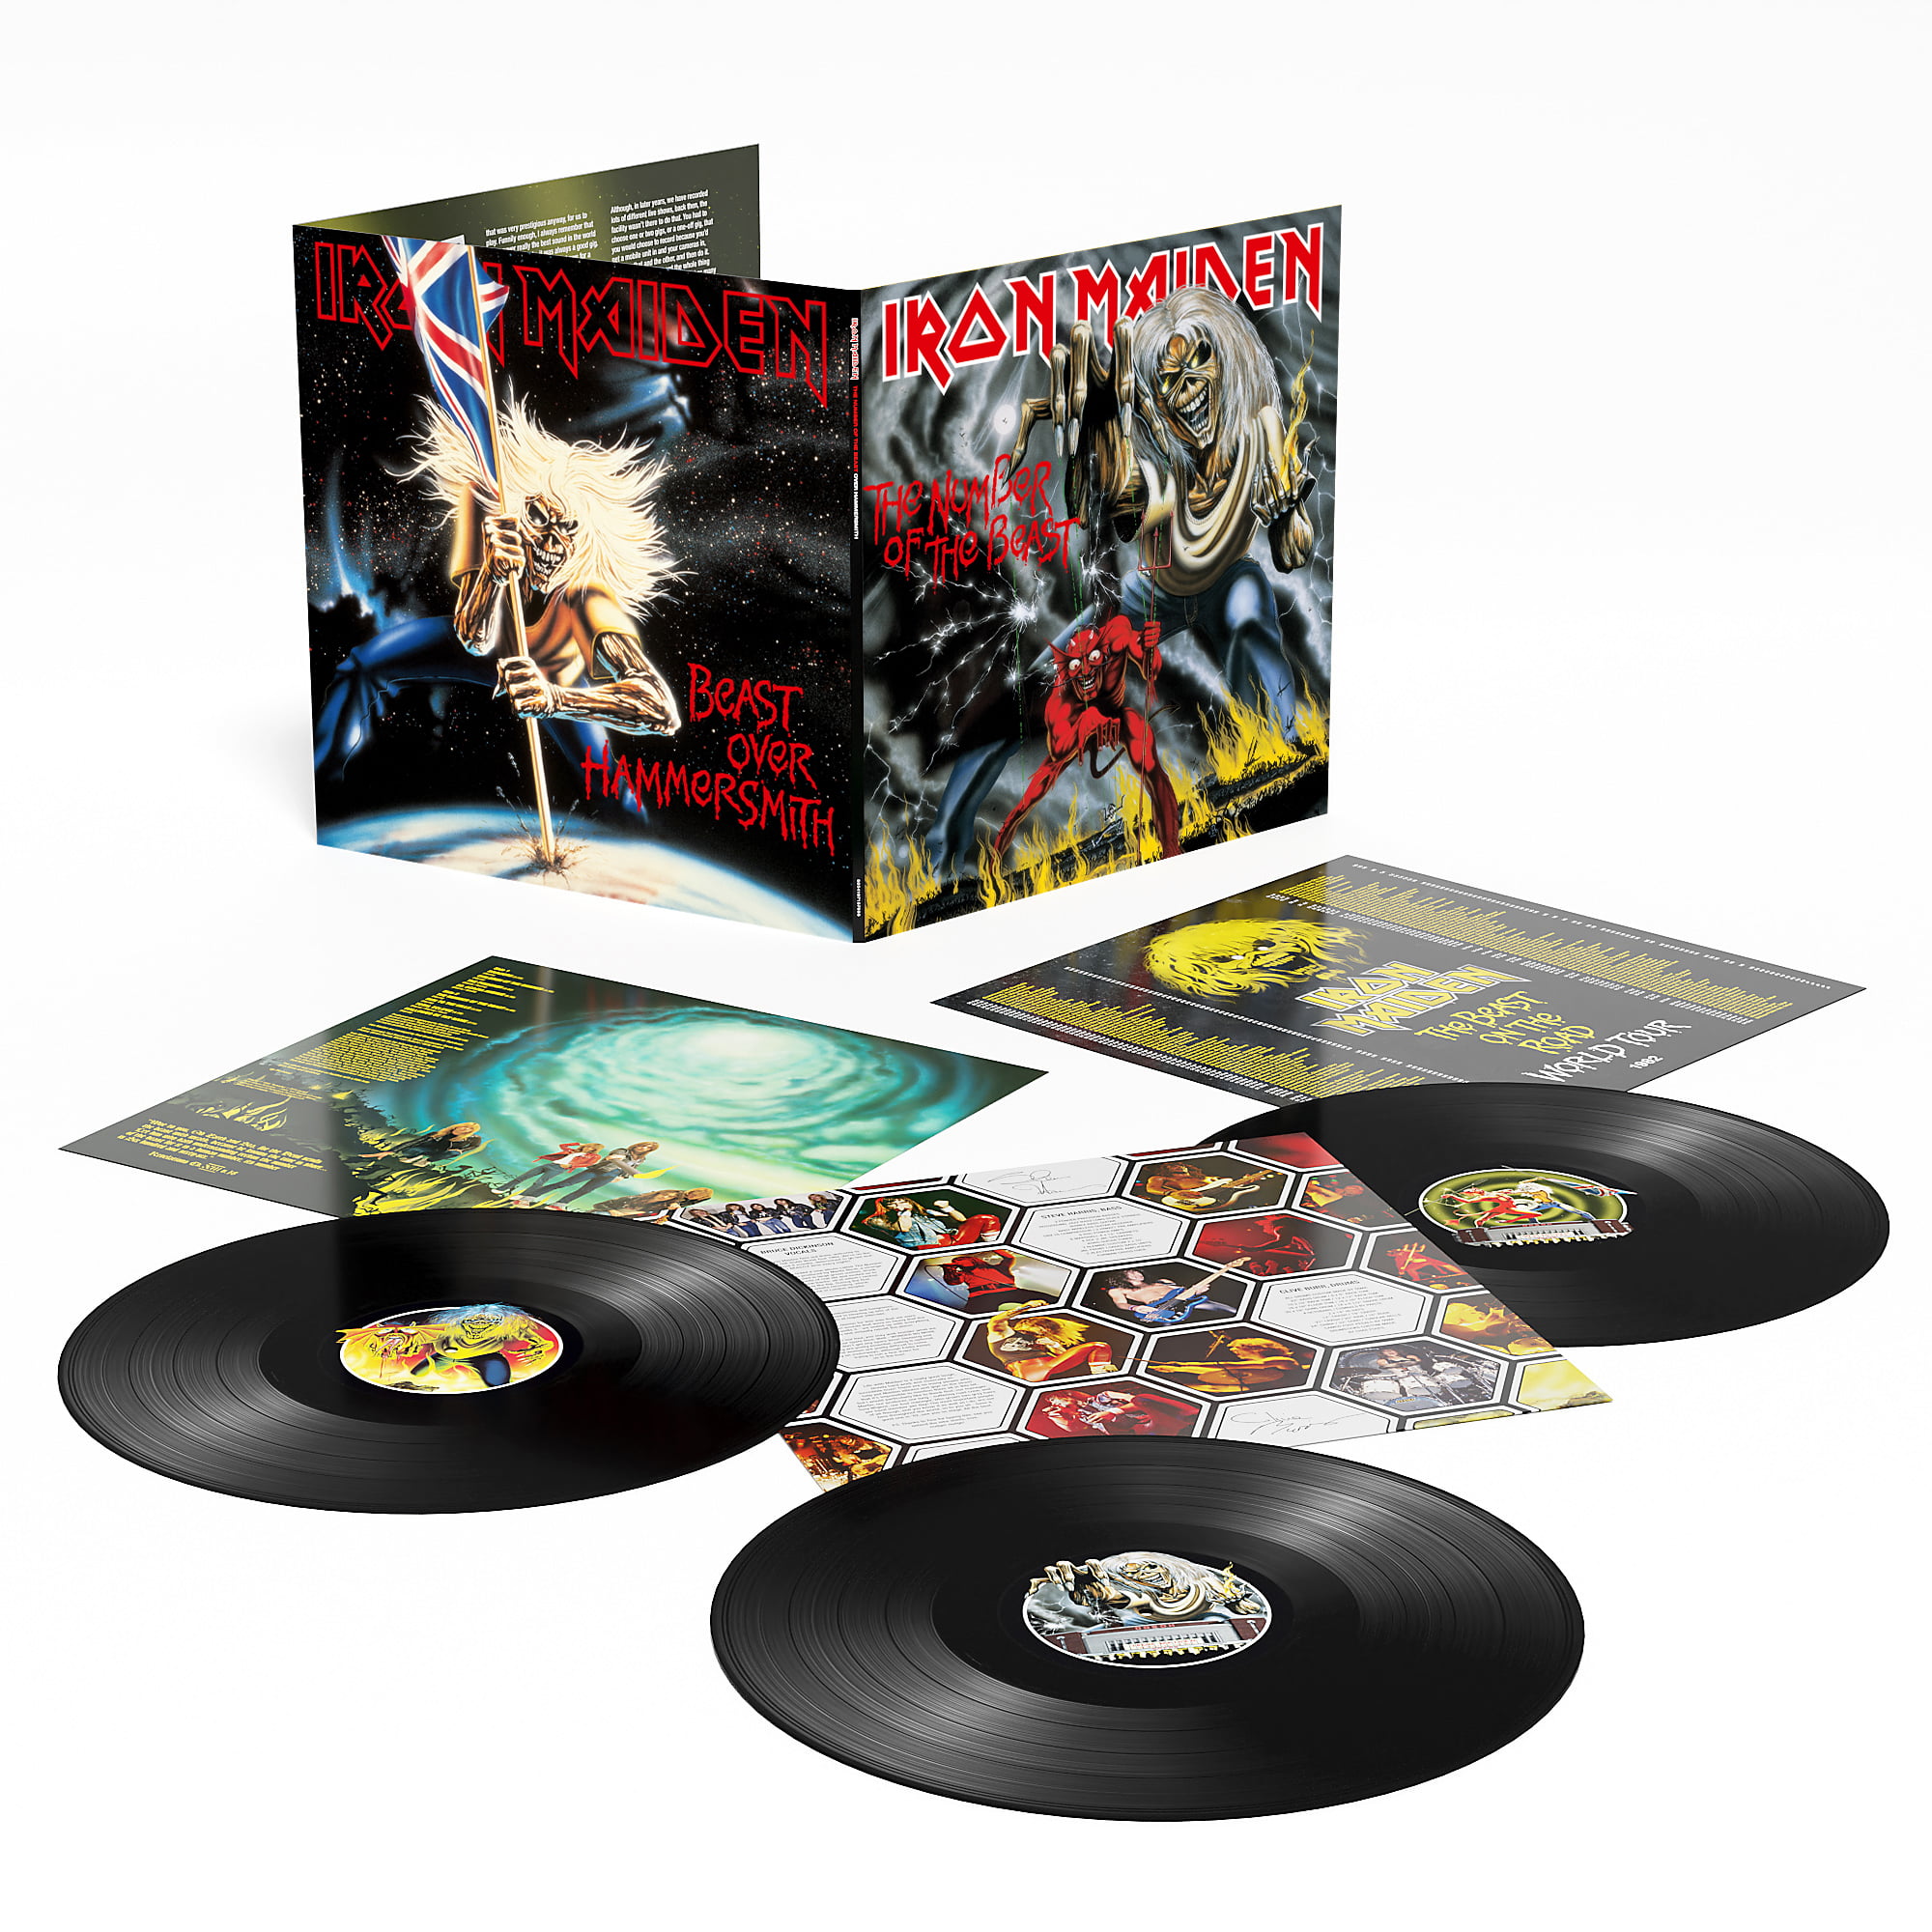 Iron Maiden - The Number Of The Beast / Beast Over Hammersmith (40th Anniversary) - 3LP Vinyl $33.19 (save 45%) Pre-Order Free S&H